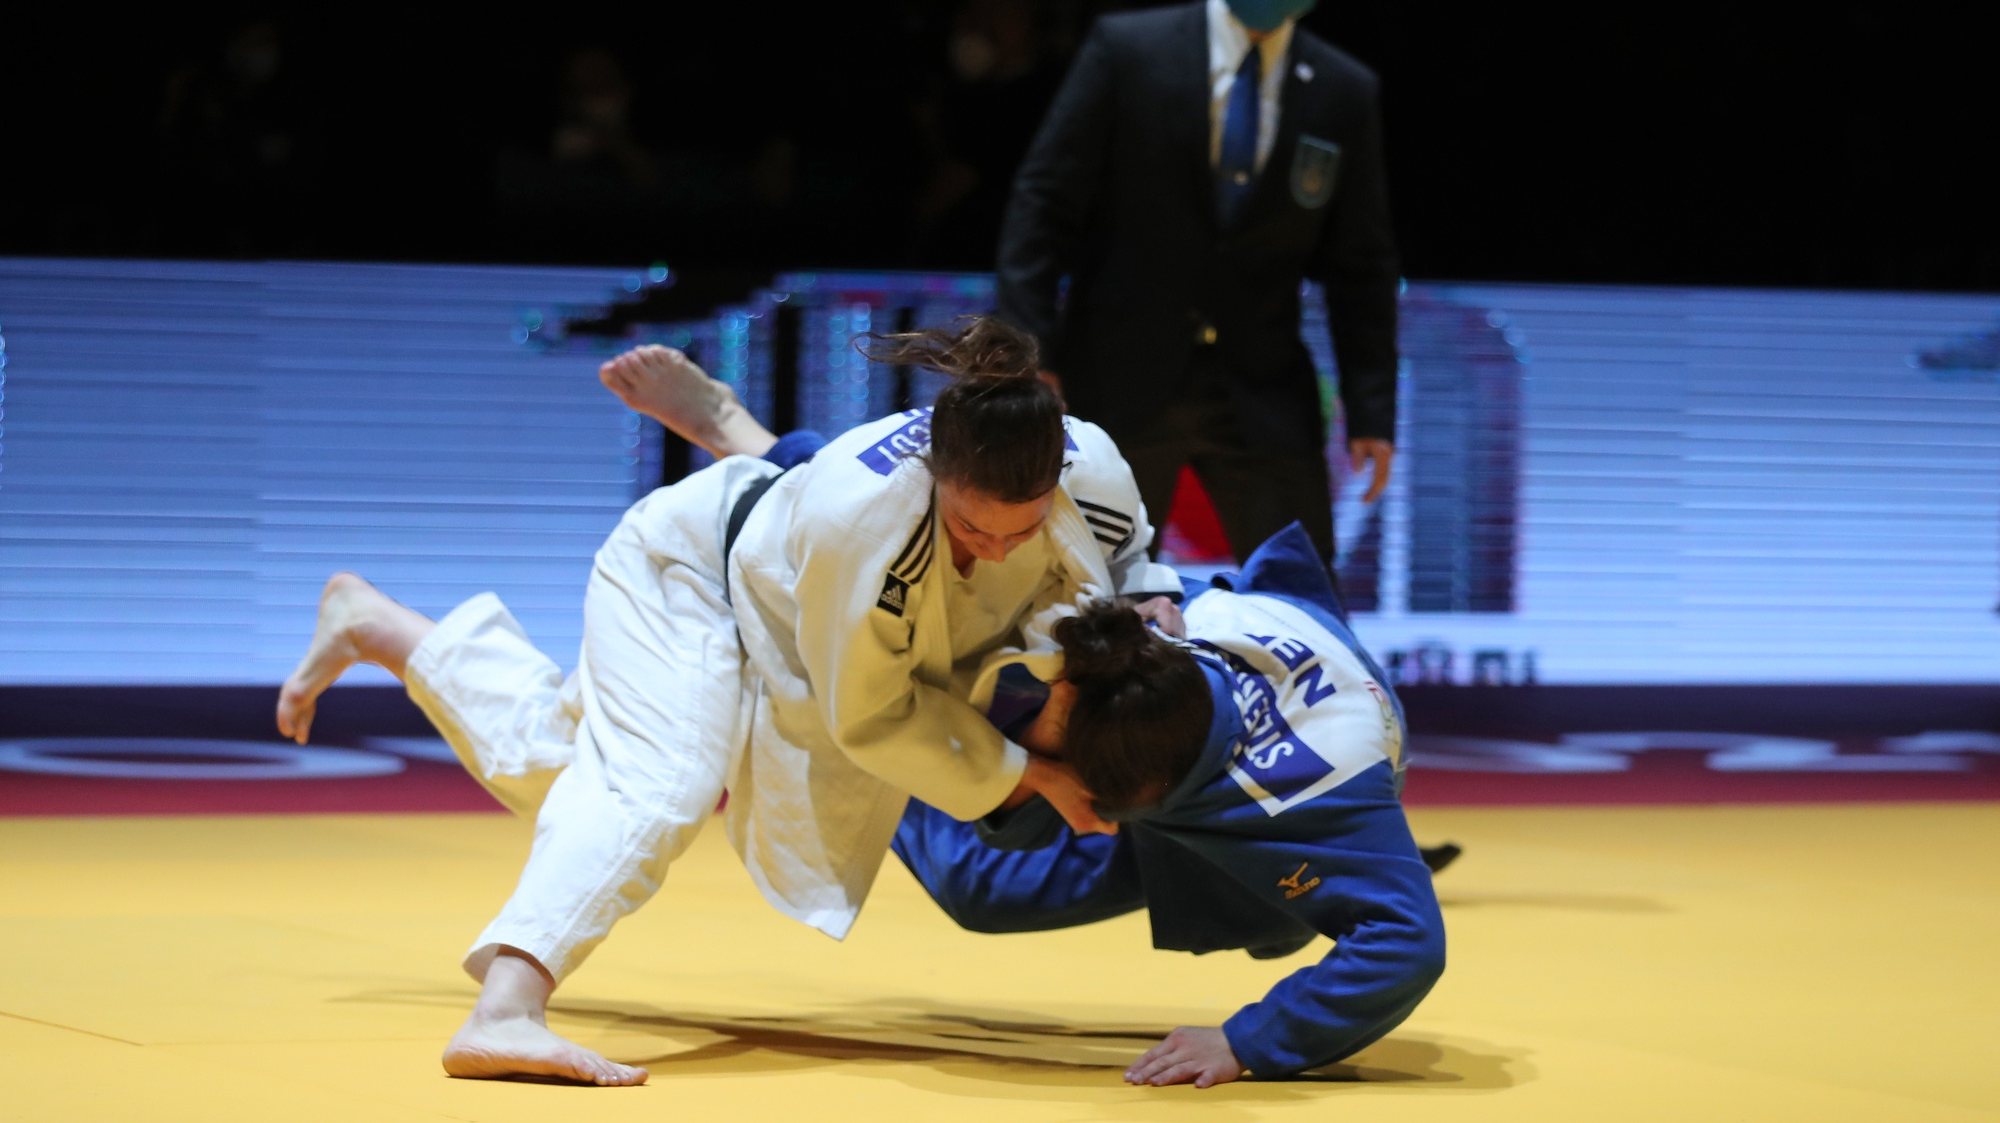 Beata Pacut of Polone (White) and Guusje Steenhuis of Netherlands (blue) in action in the final match in women&#039;s -78 kg category at the European Judo Championships in Lisbon, Portugal, 18 April 2021. NUNO VEIGA/LUSA